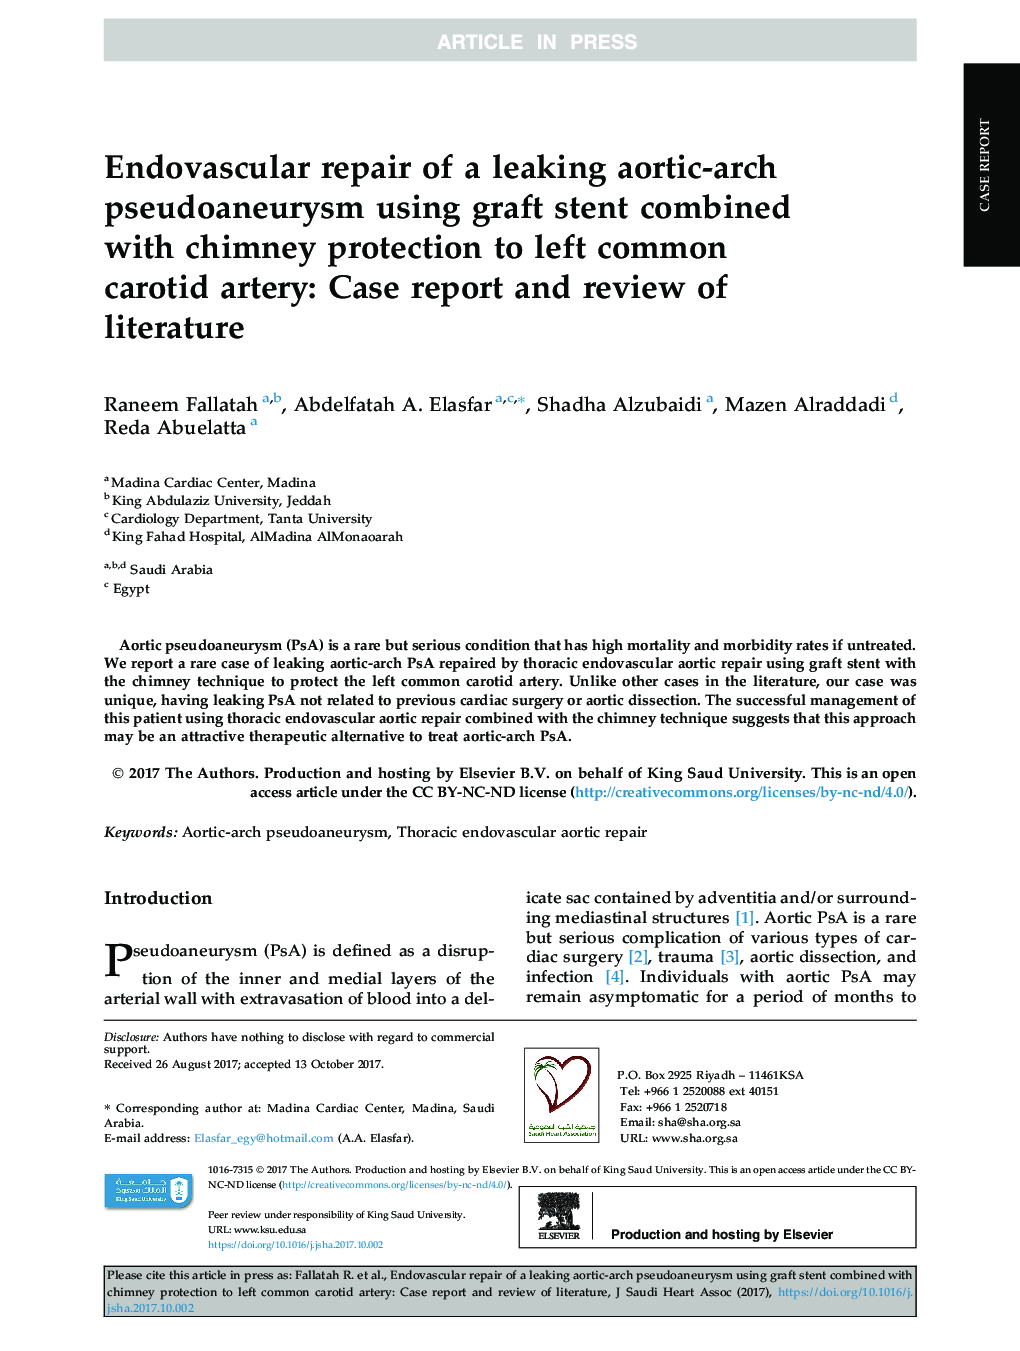 Endovascular repair of a leaking aortic-arch pseudoaneurysm using graft stent combined with chimney protection to left common carotid artery: Case report and review of literature